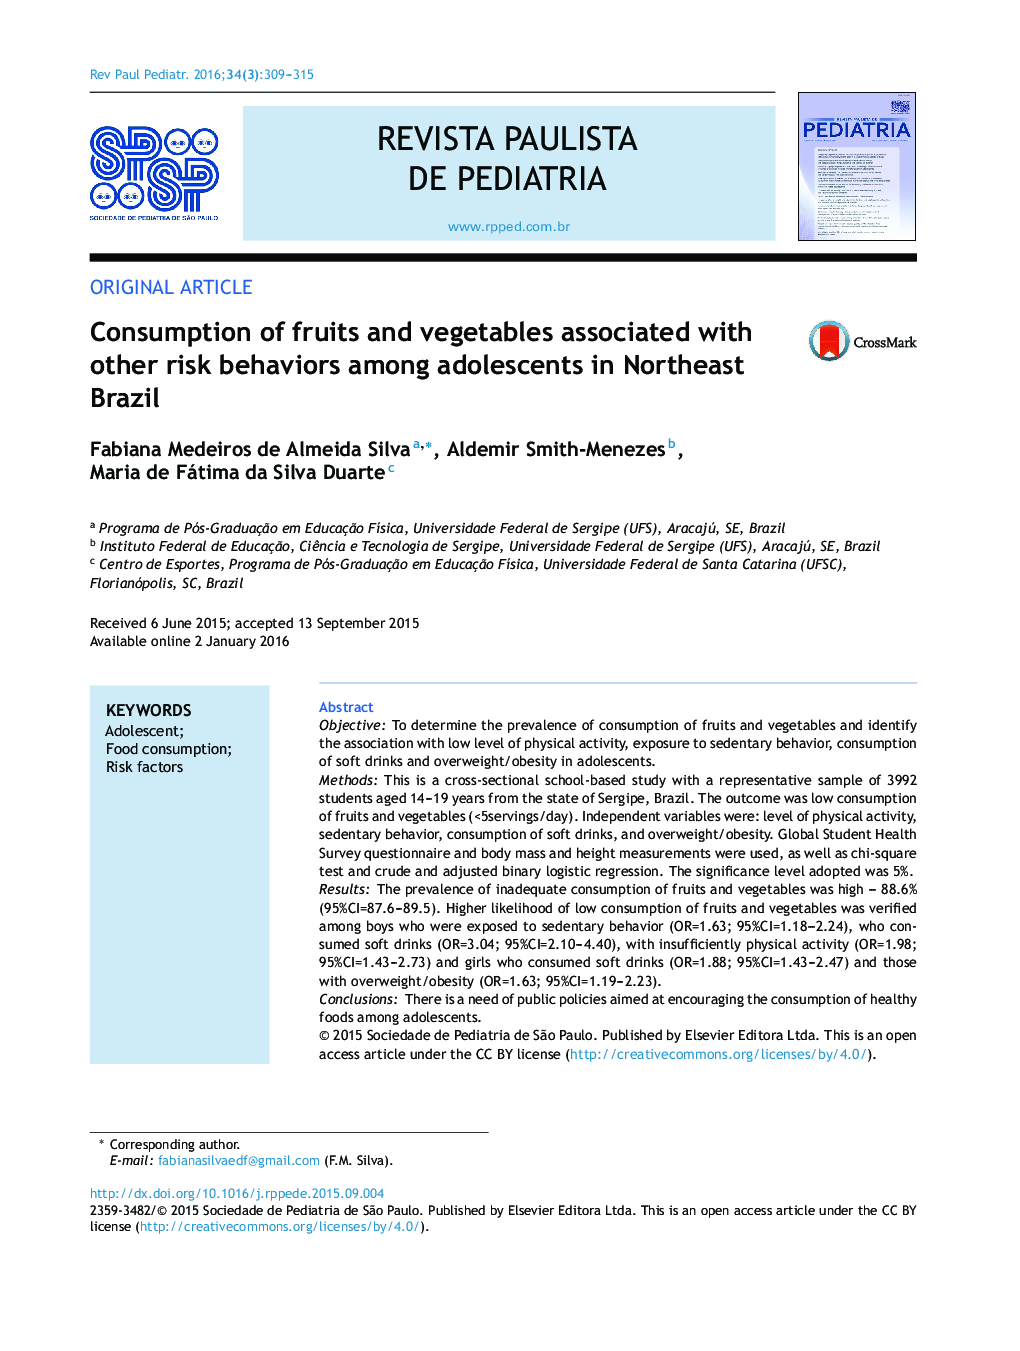 Consumption of fruits and vegetables associated with other risk behaviors among adolescents in Northeast Brazil